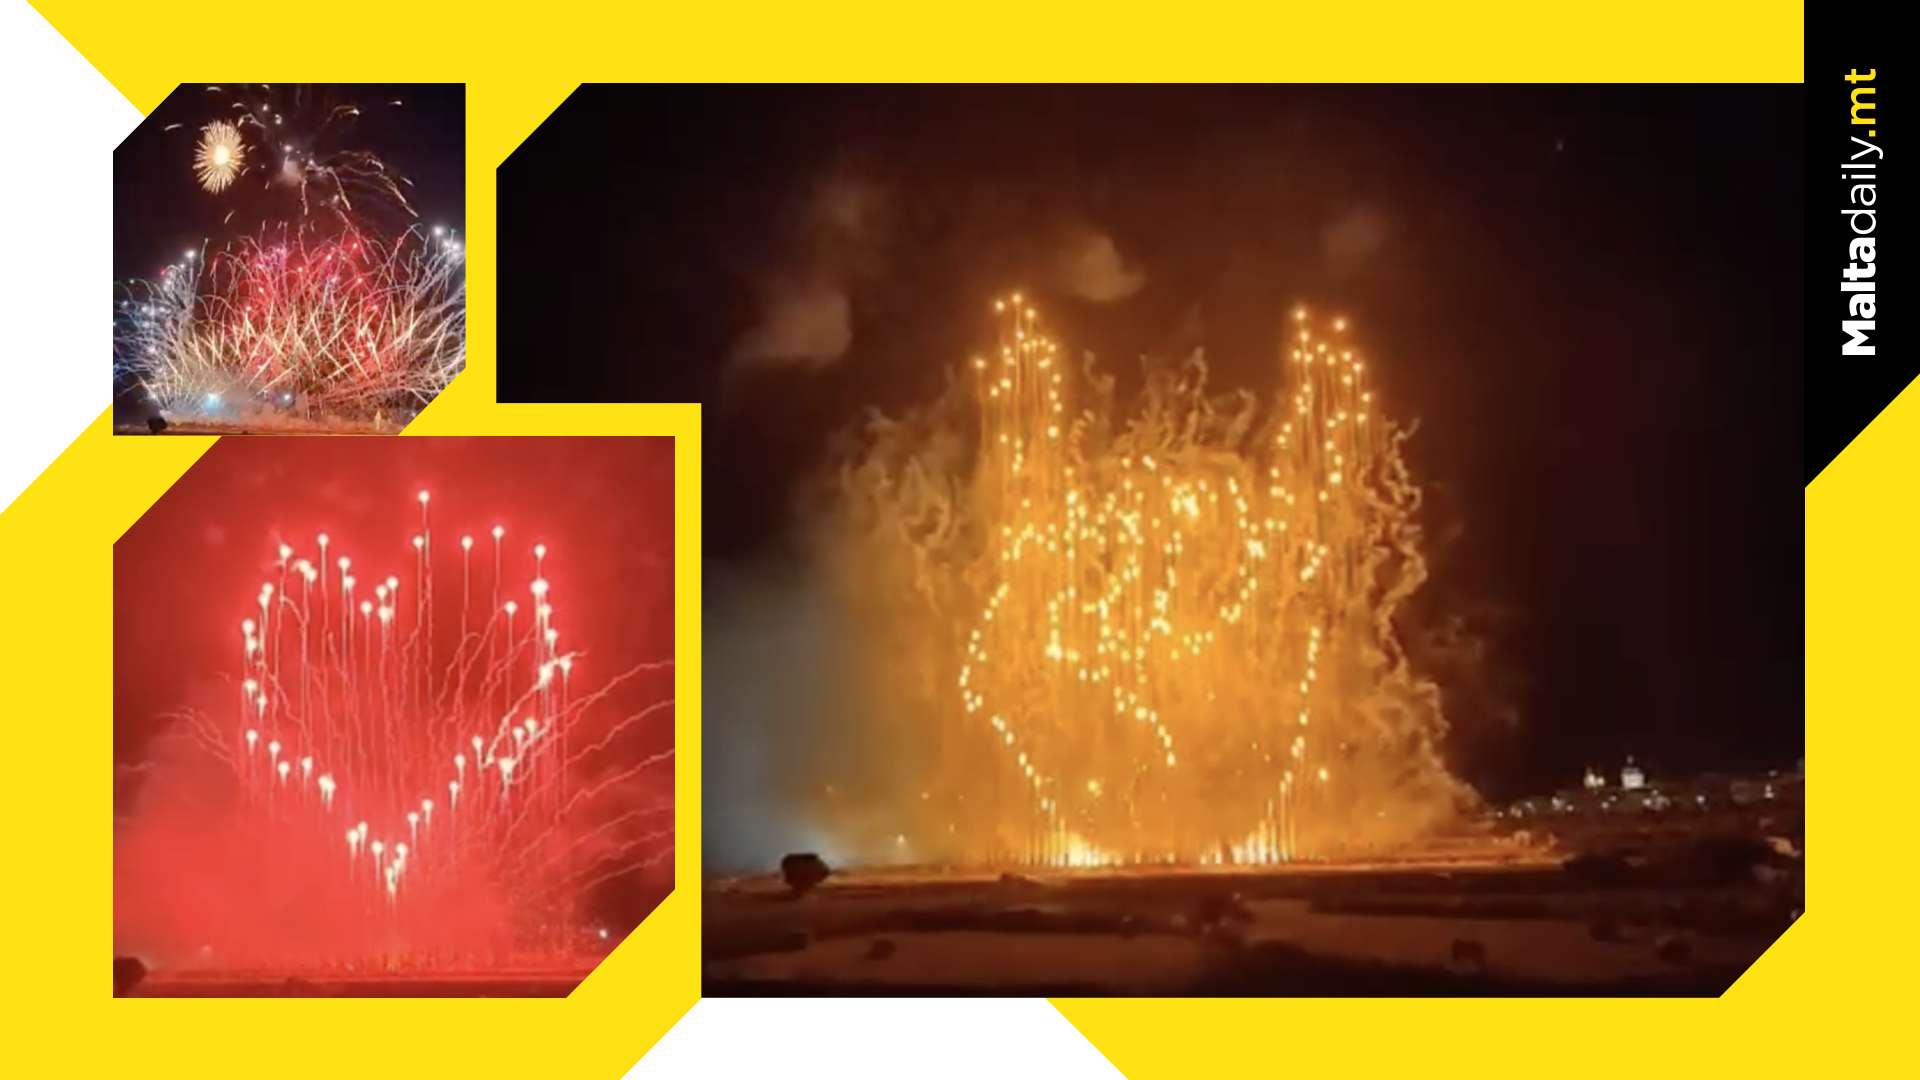 Rock music and fireworks synchronise in Munxar, Gozo